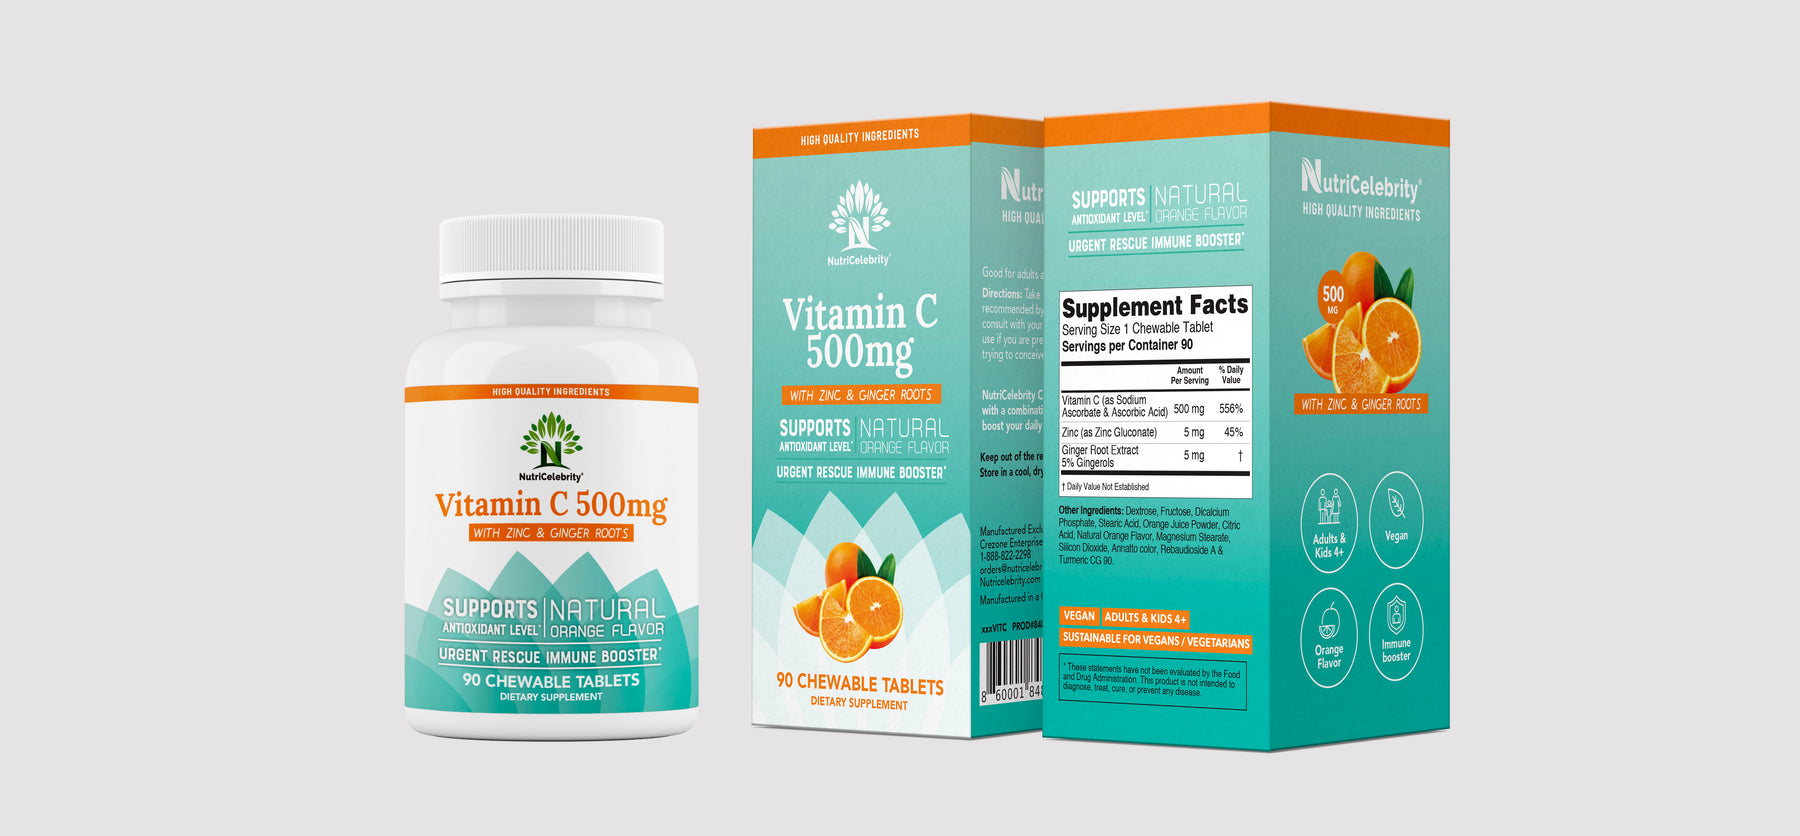 *NEW PRODUCT LAUNCH* Nutricelebrity Vitamin C Chewables